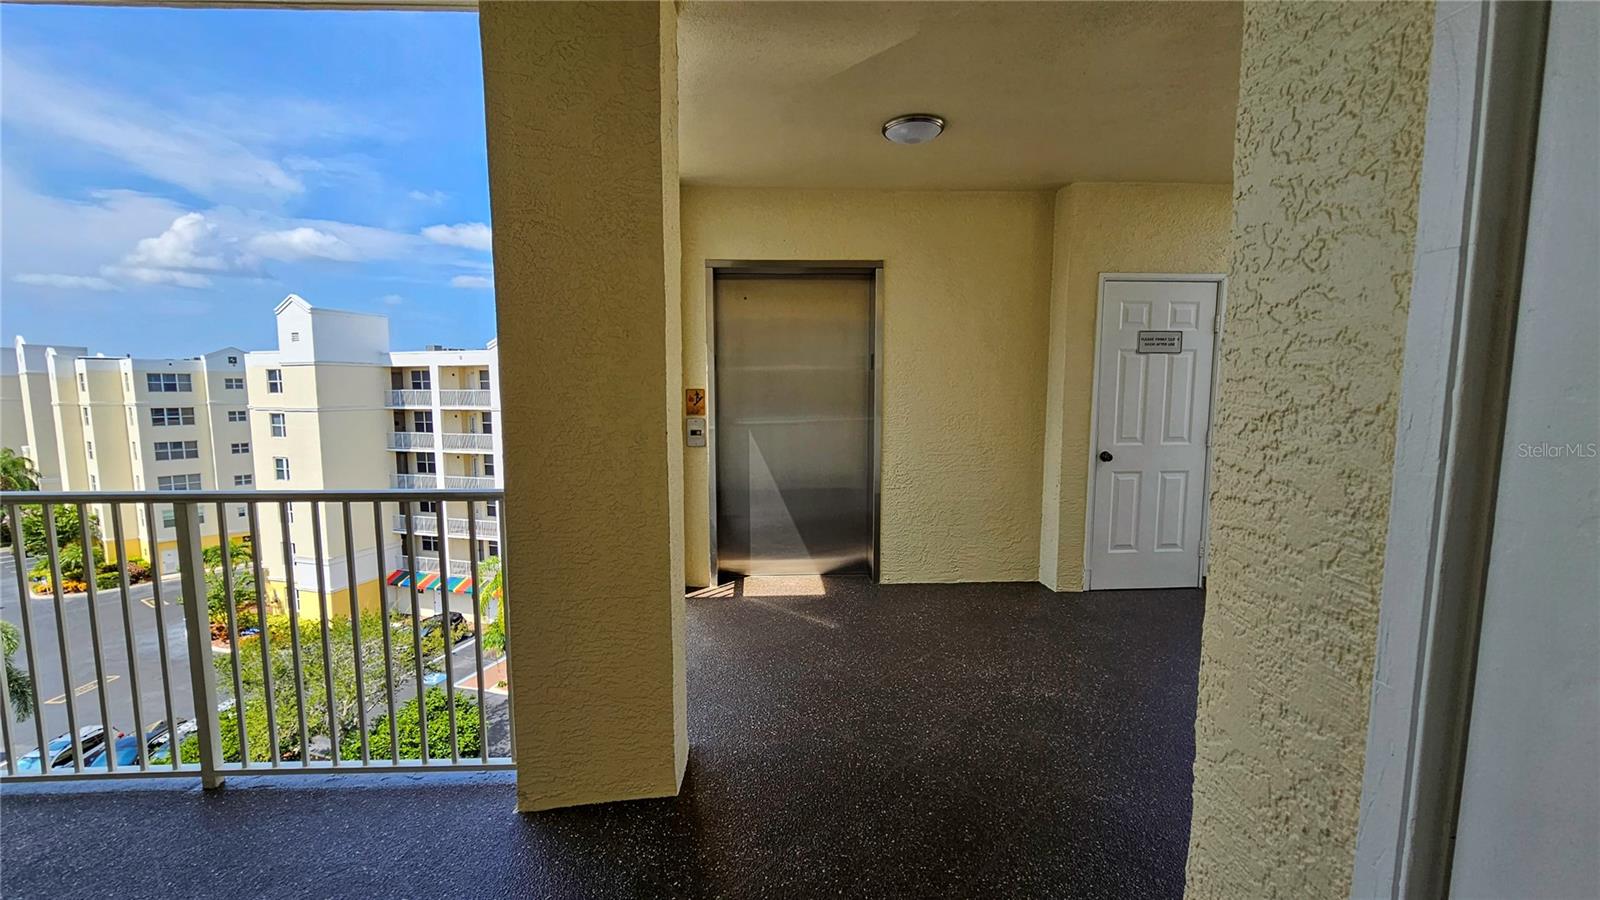 Elevator & Laundry Chute is right across the hall from your door!